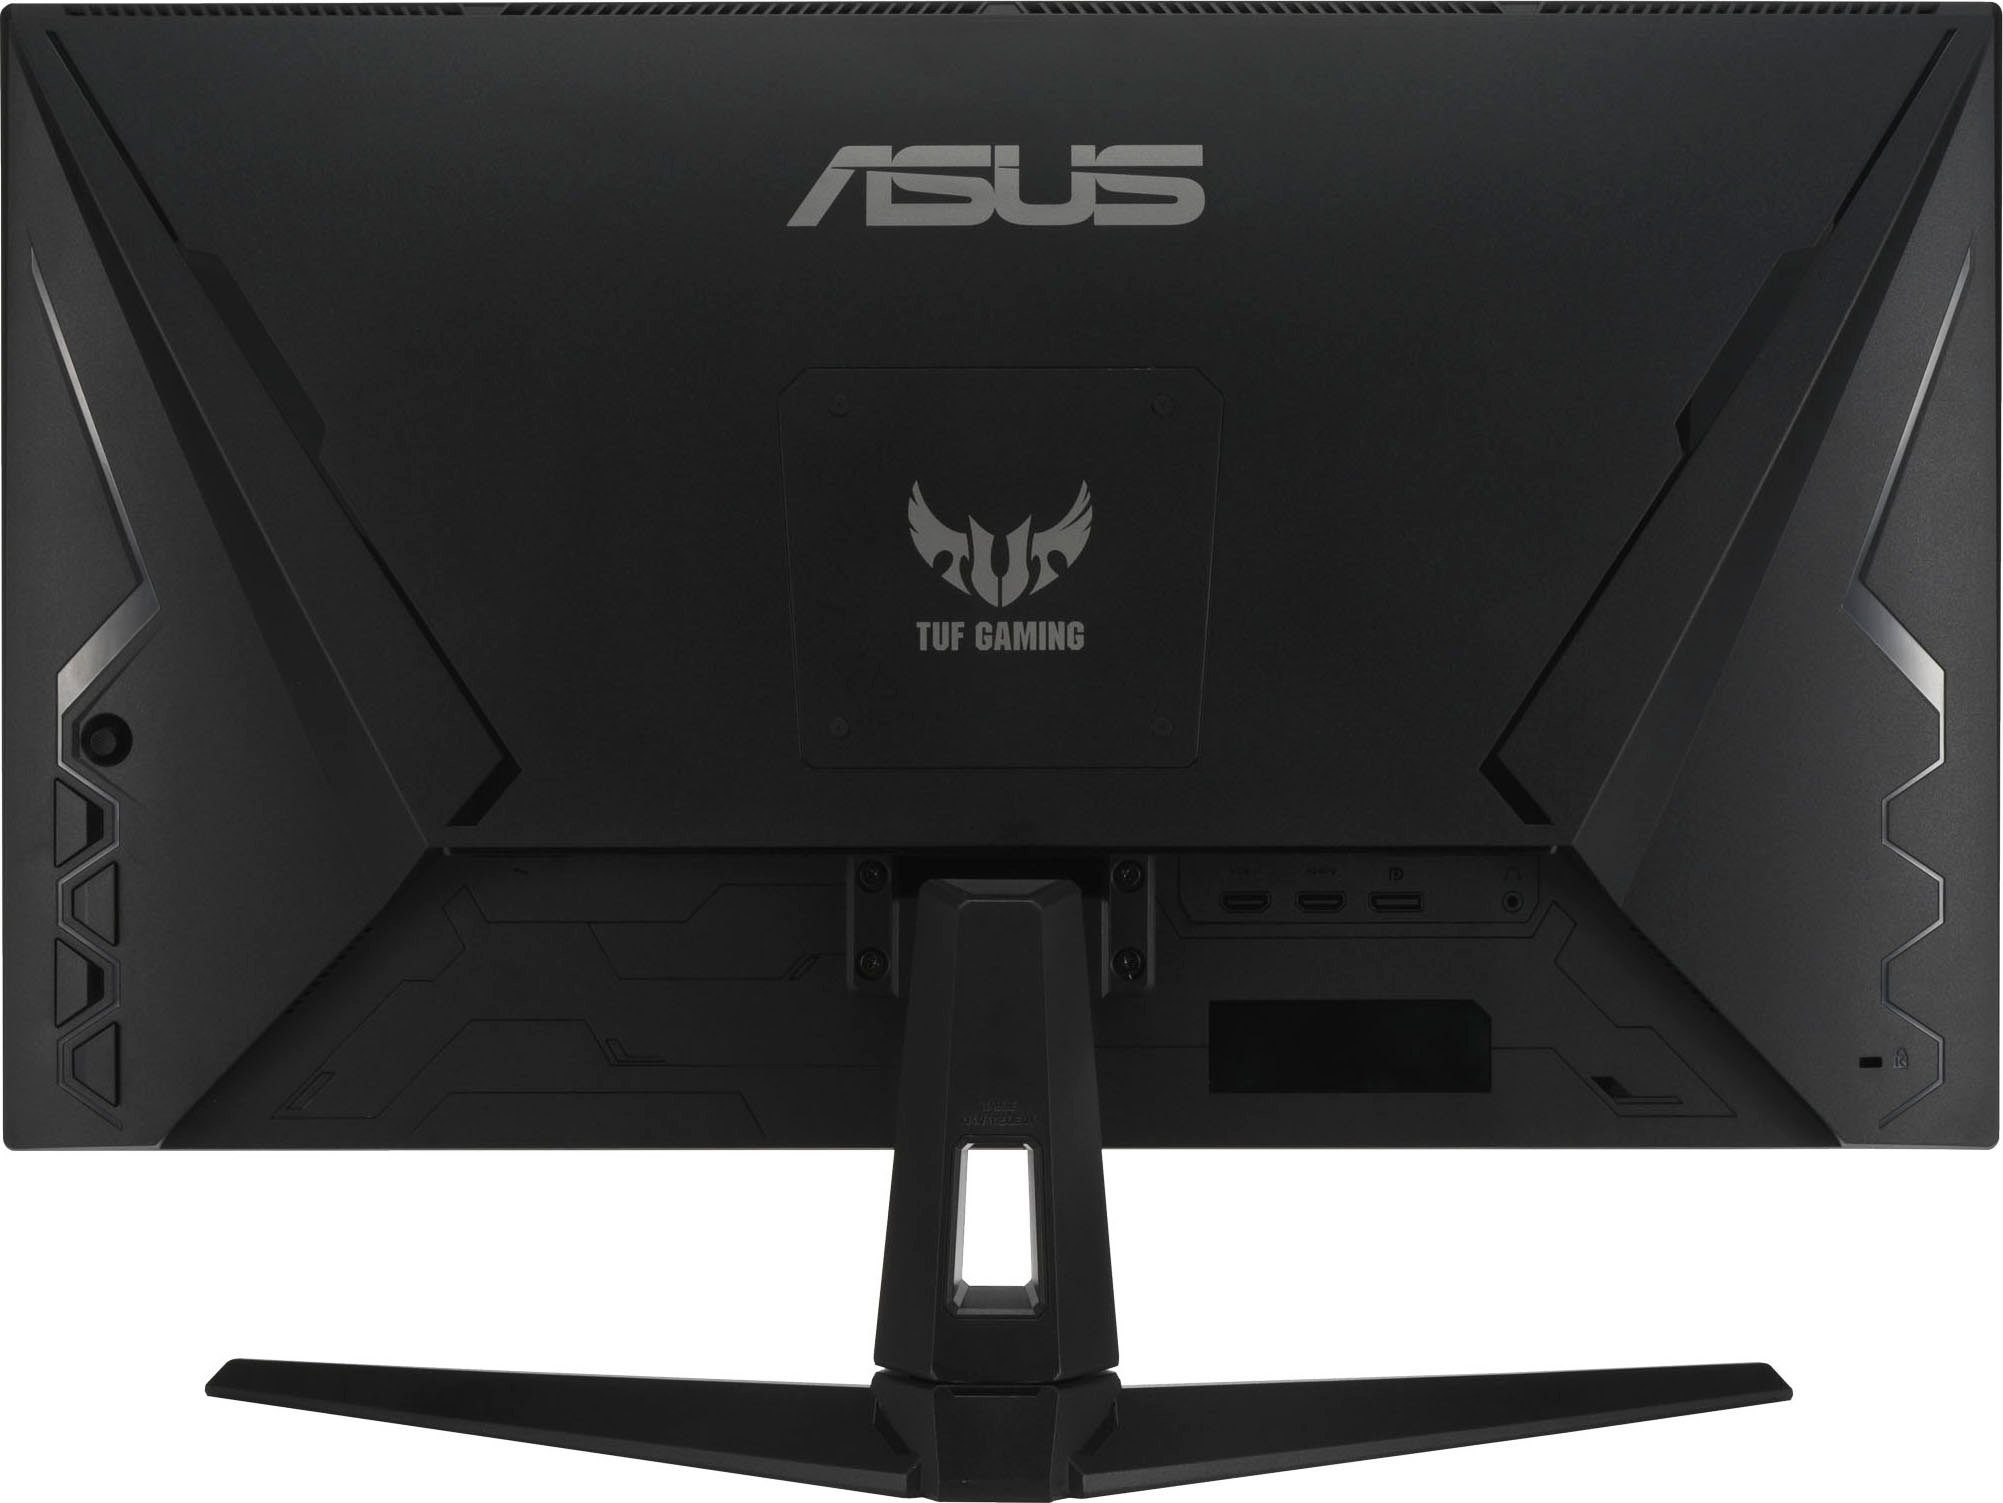 cm/28 Ultra x px, 4K (71,12 3840 Hz, HD, 5 60 Reaktionszeit, Asus LED-Monitor ", VG289Q1A ms 2160 IPS)